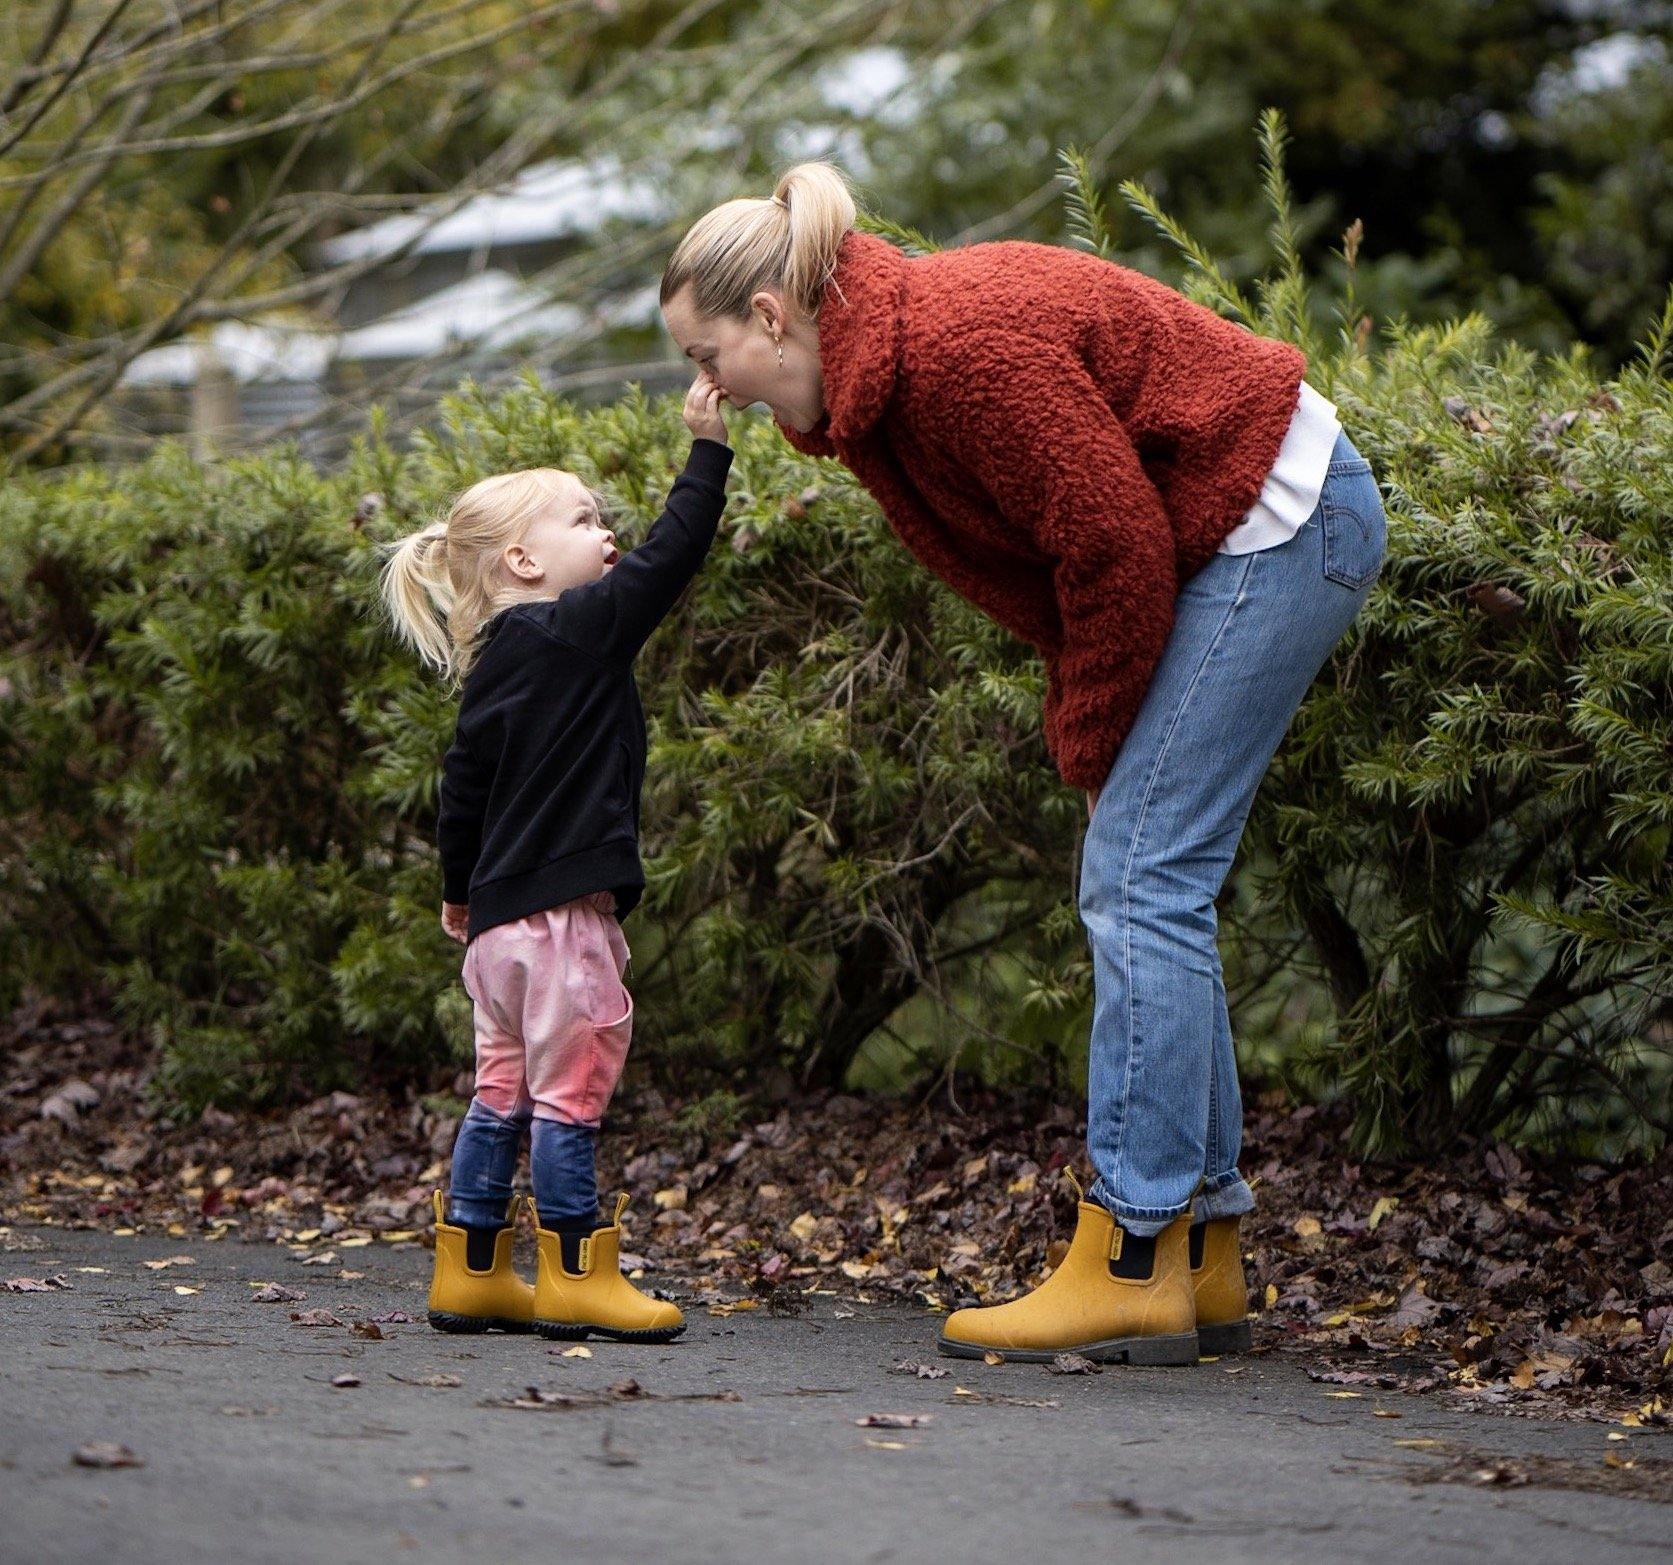 mother and daughter walking, wearing yellow rain boots